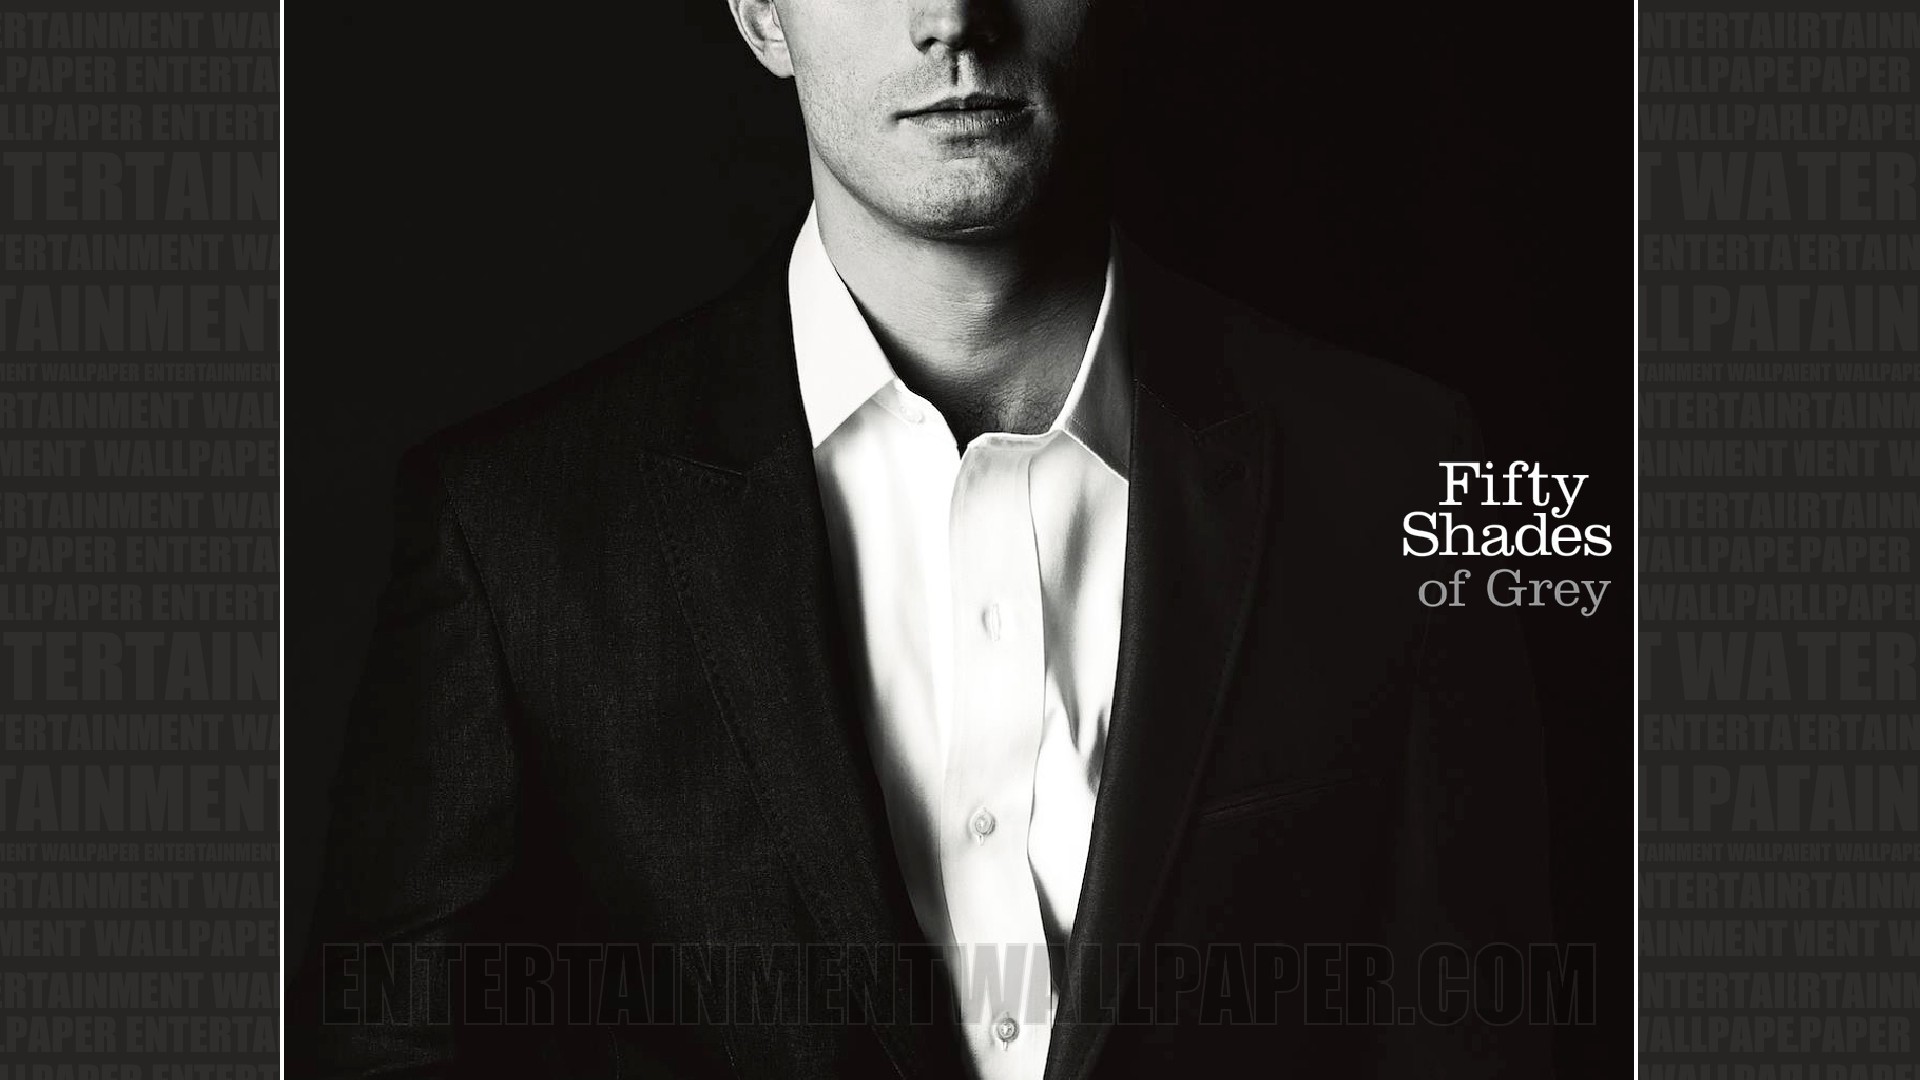 Fifty Shades of Grey Wallpaper – Original size, download now.